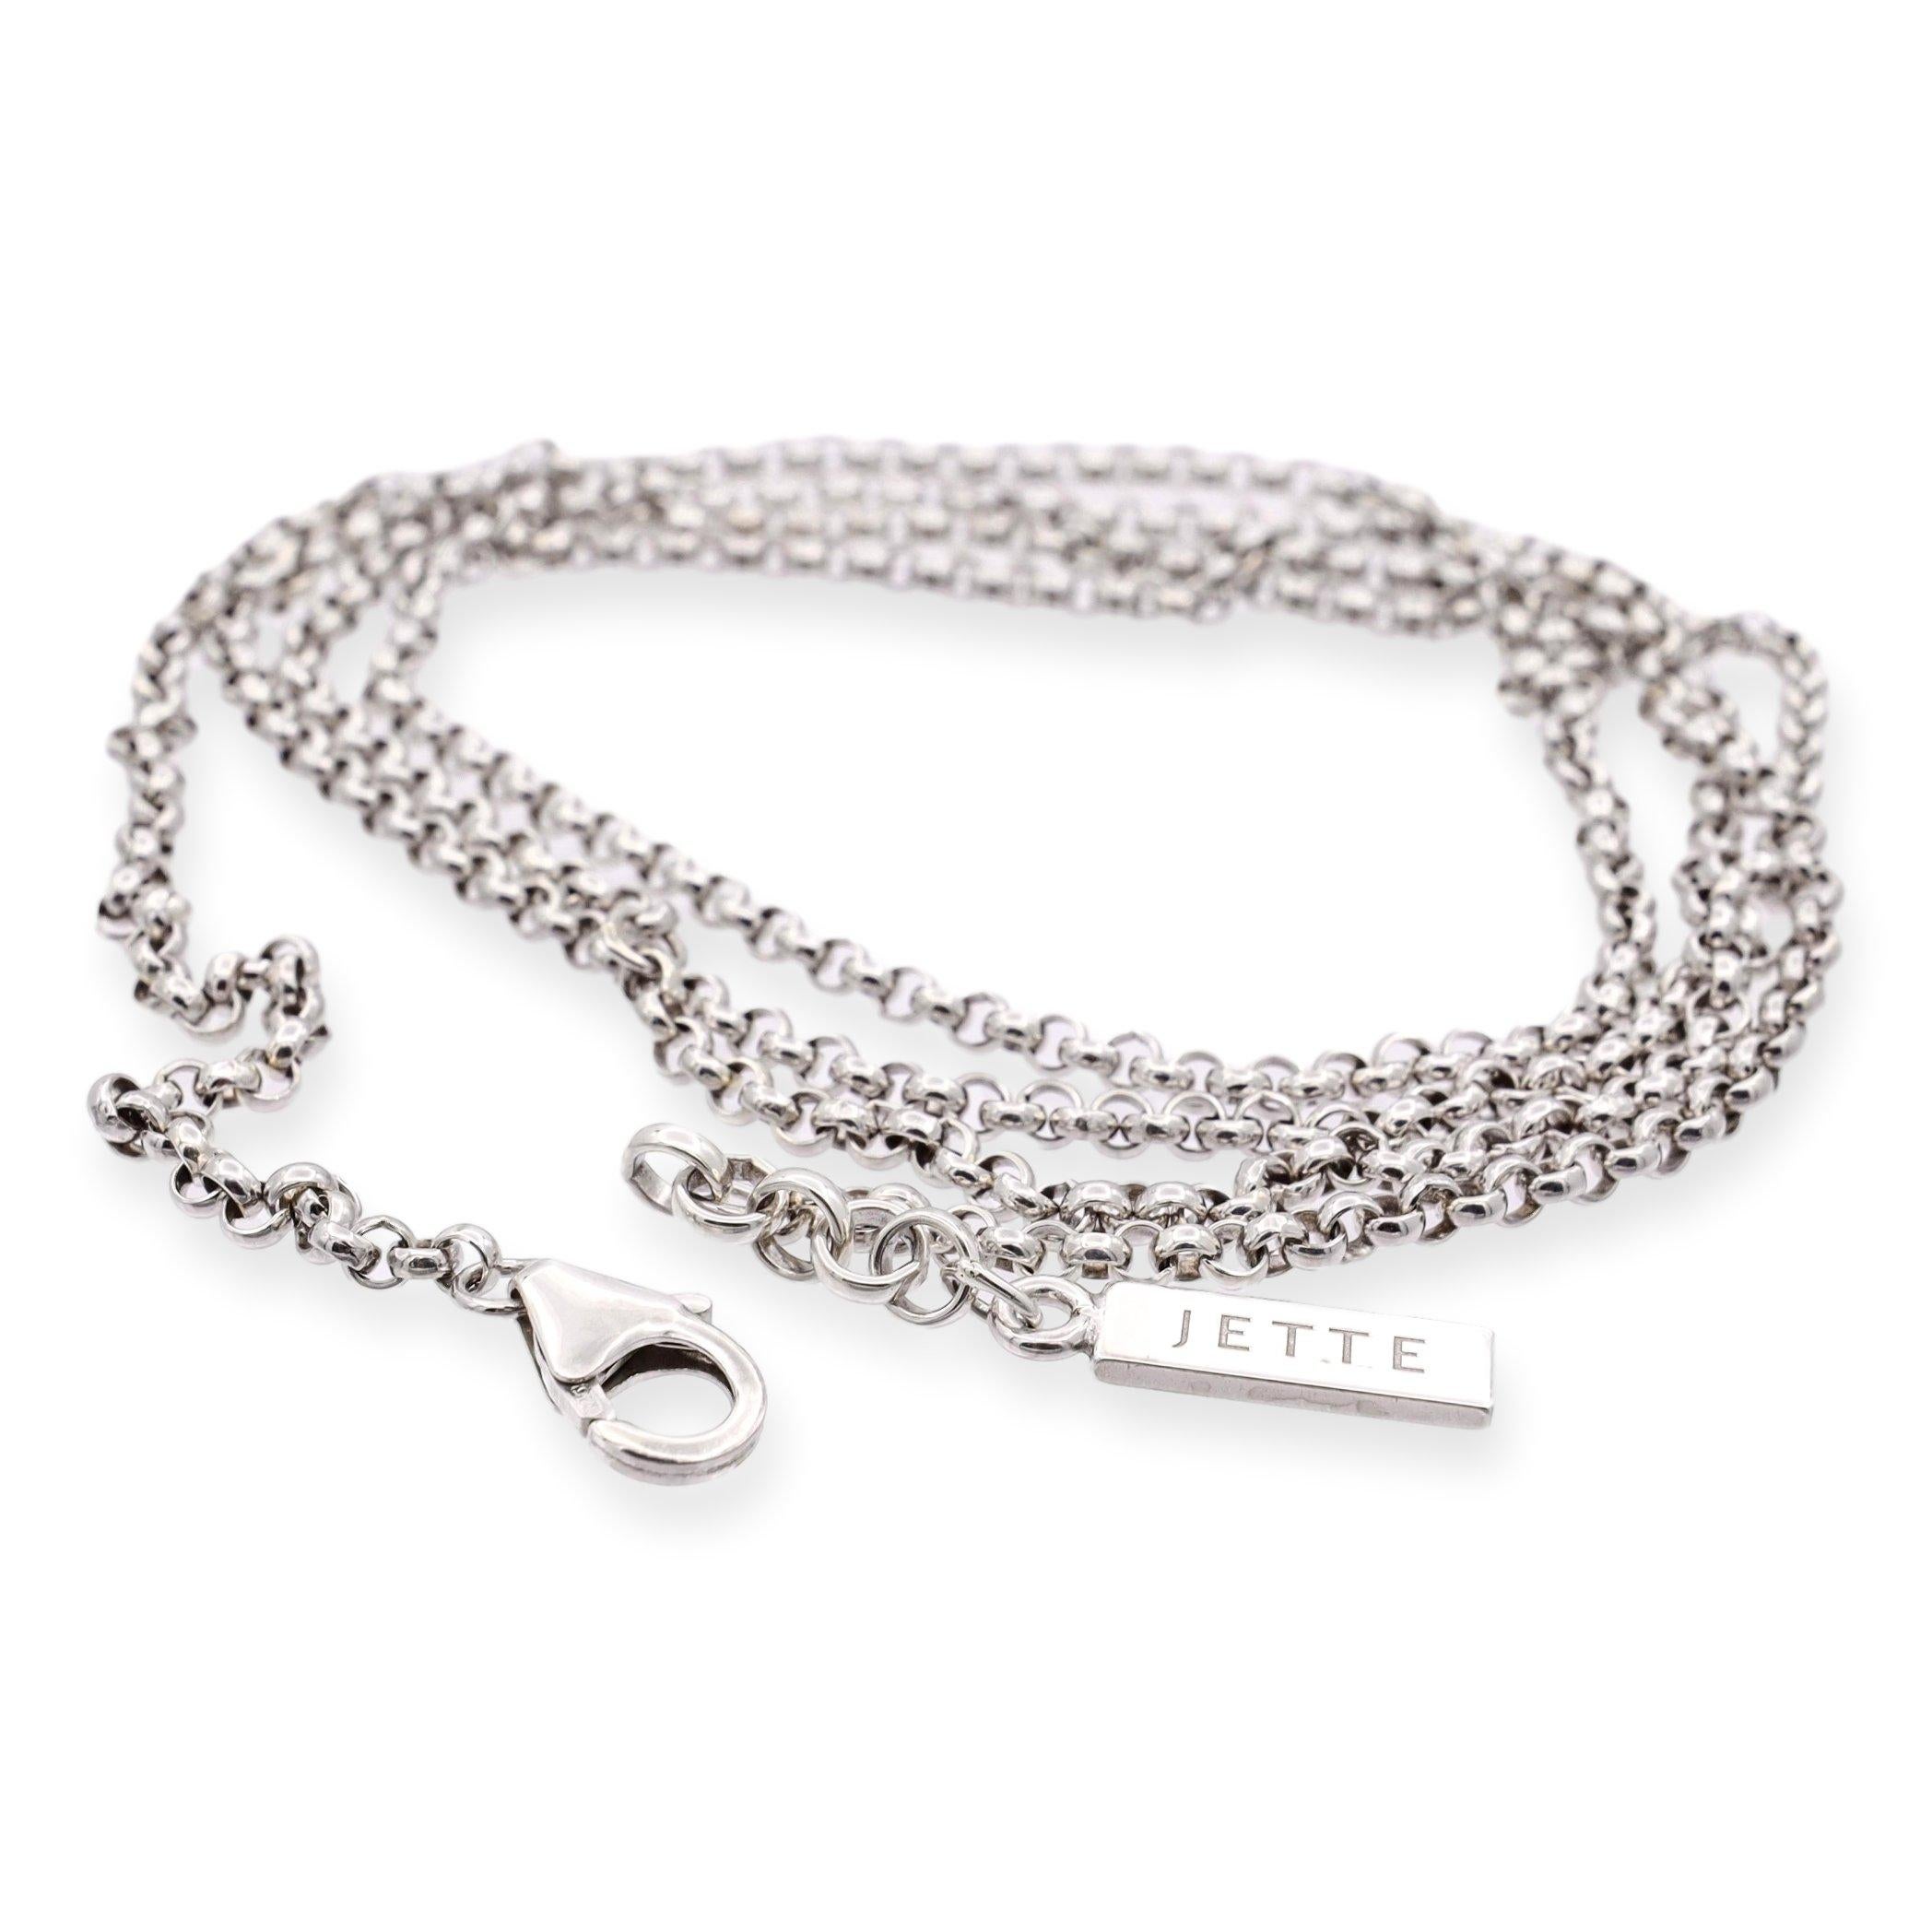 Jette Silver Chain Necklace, a captivating accessory that effortlessly combines style and versatility. This 36-inch piece is meticulously crafted in fine sterling silver with 2.5mm round links, showcasing a sleek and contemporary design. The lobster